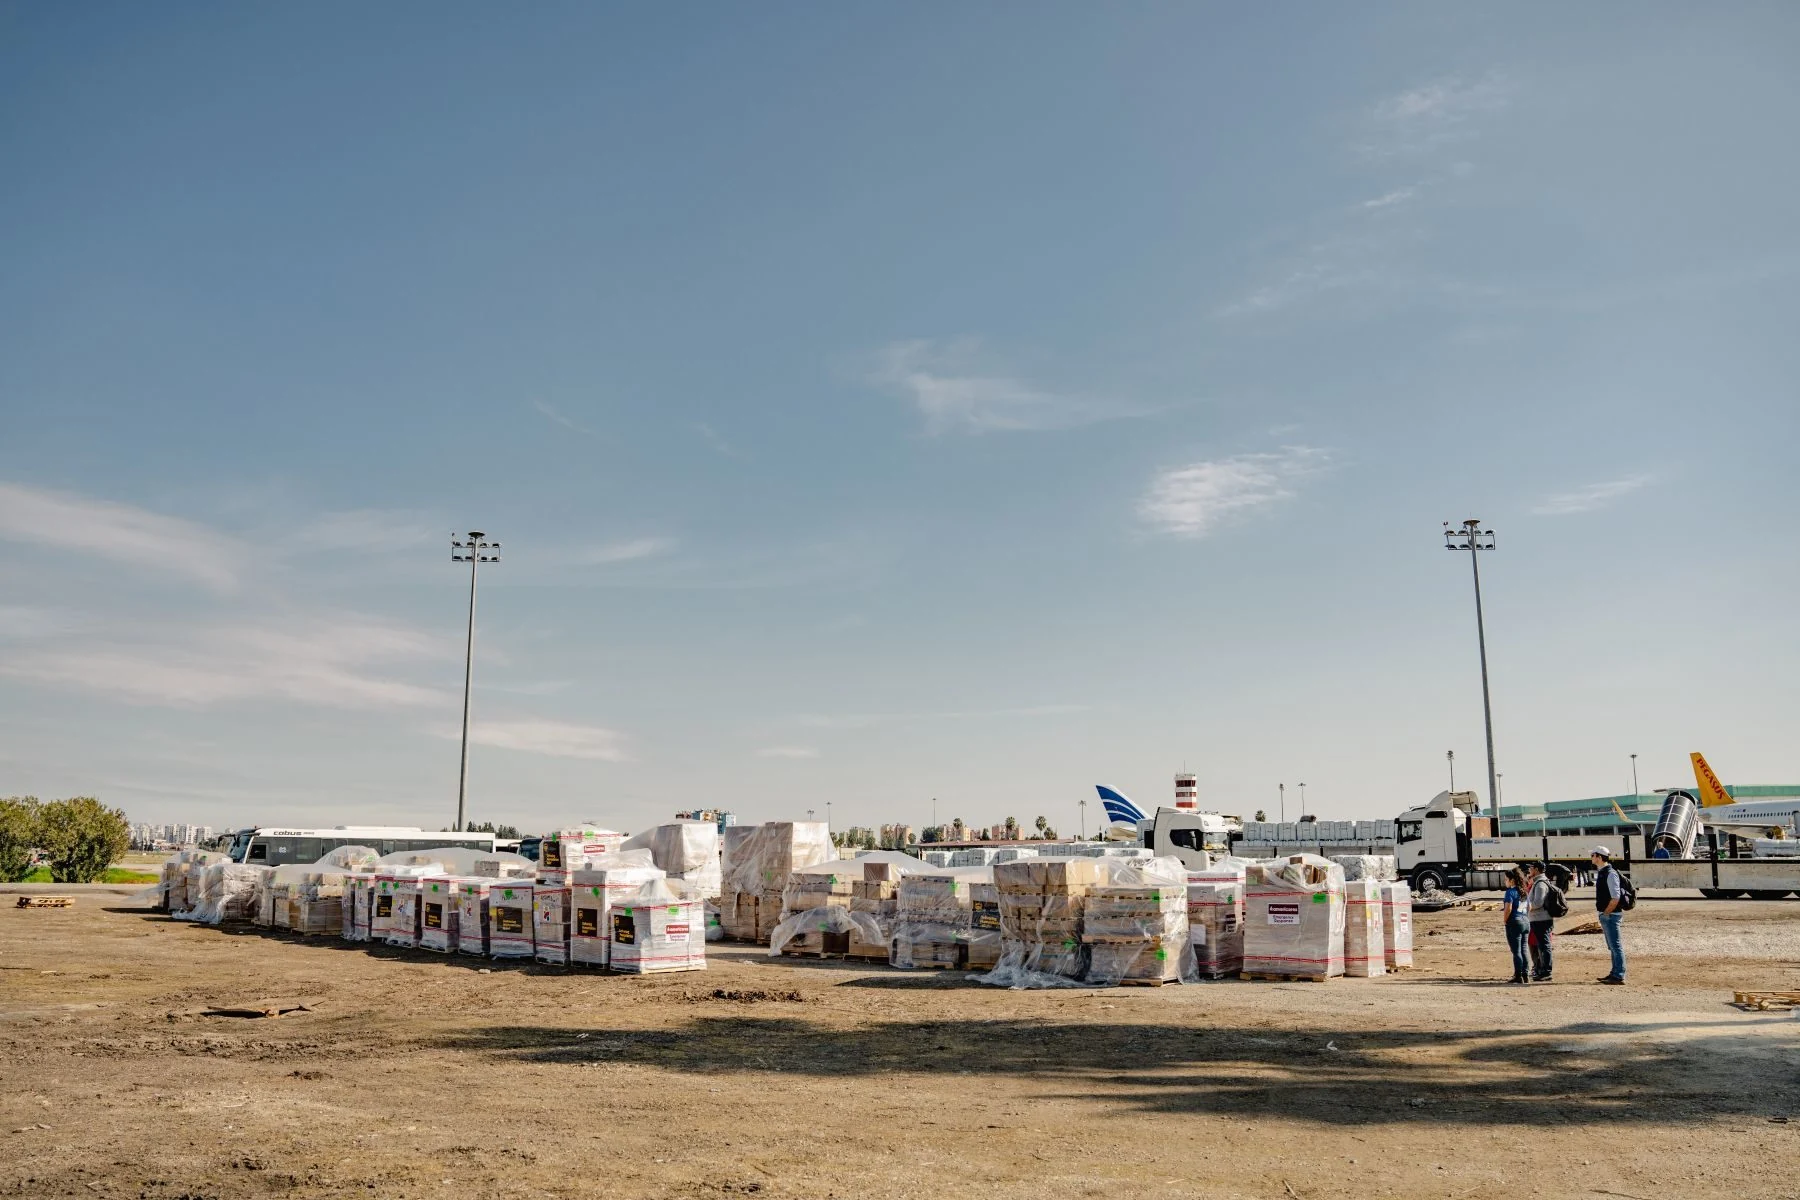 A long camera shot of a large shipment of relief supplies that sits at the airport after being unloaded with three team members checking the shipment at the right. Planes visible in the background.